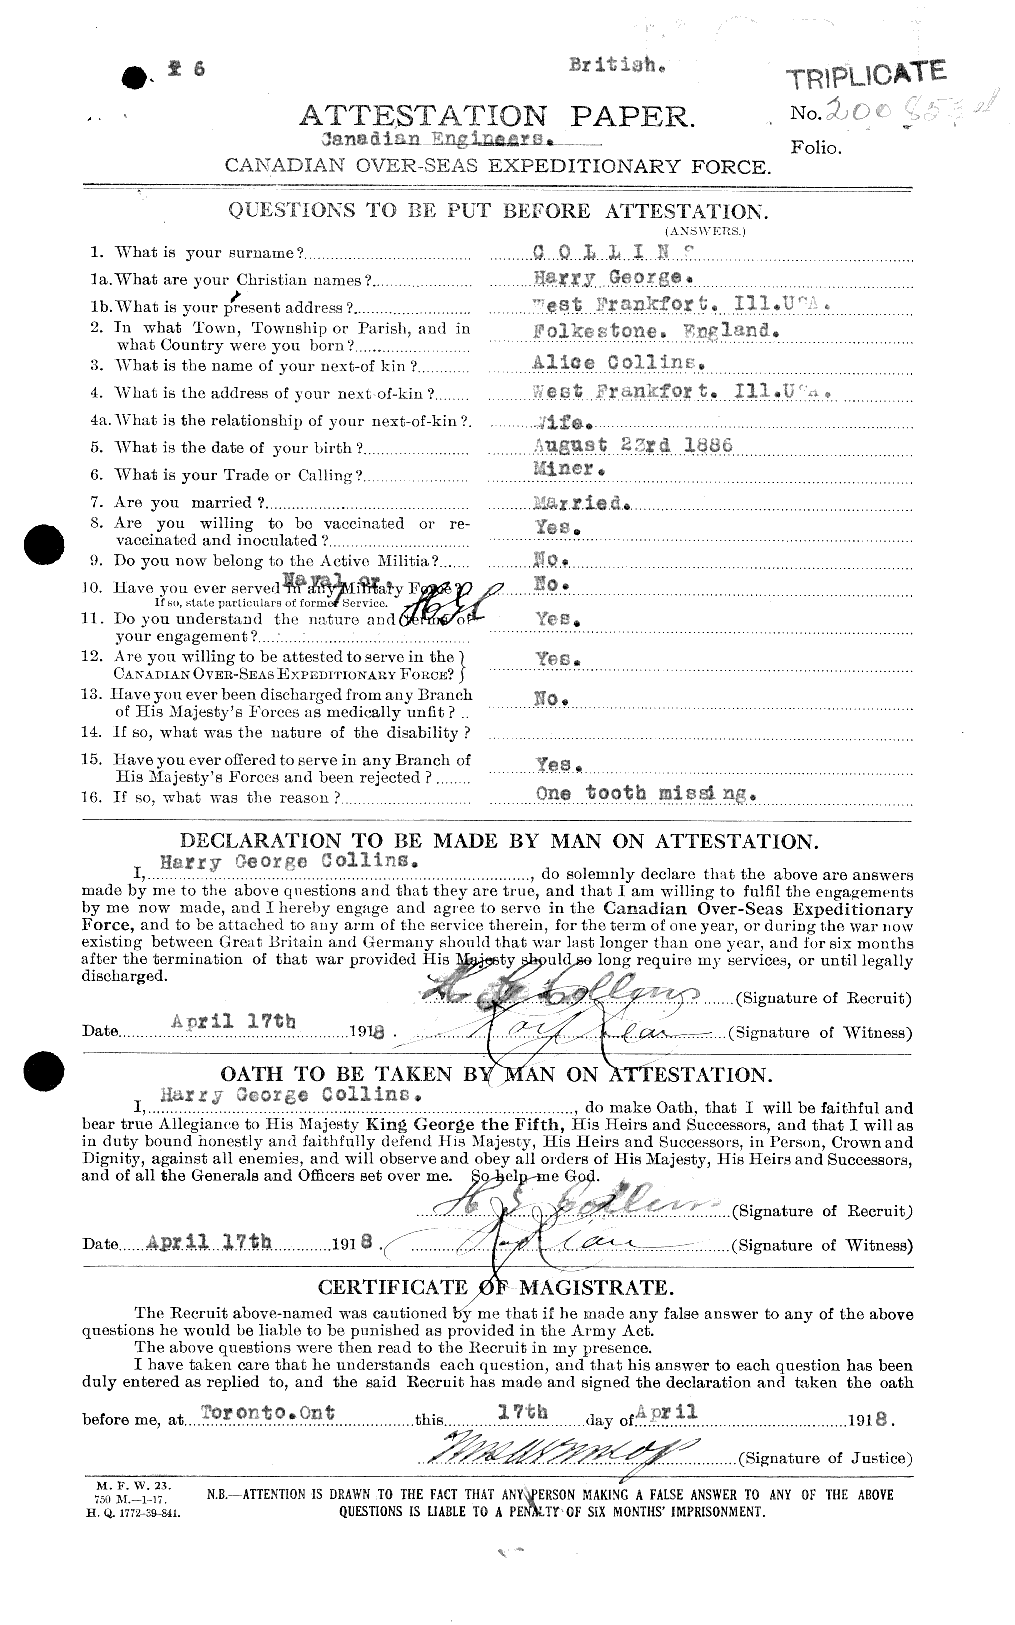 Personnel Records of the First World War - CEF 042276a